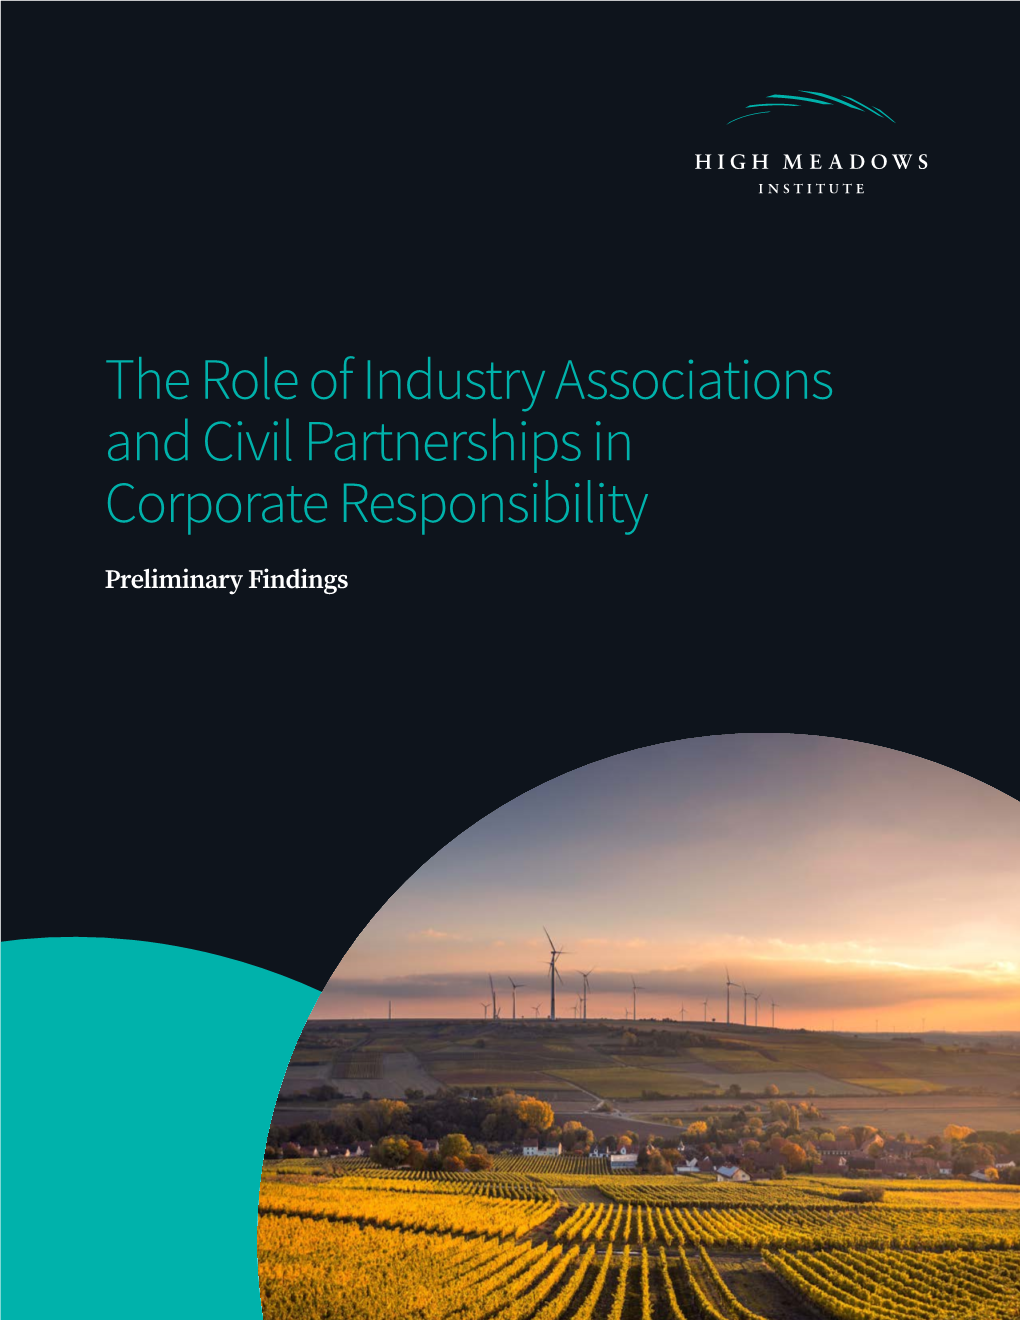 The Role of Industry Associations and Civil Partnerships in Corporate Responsibility